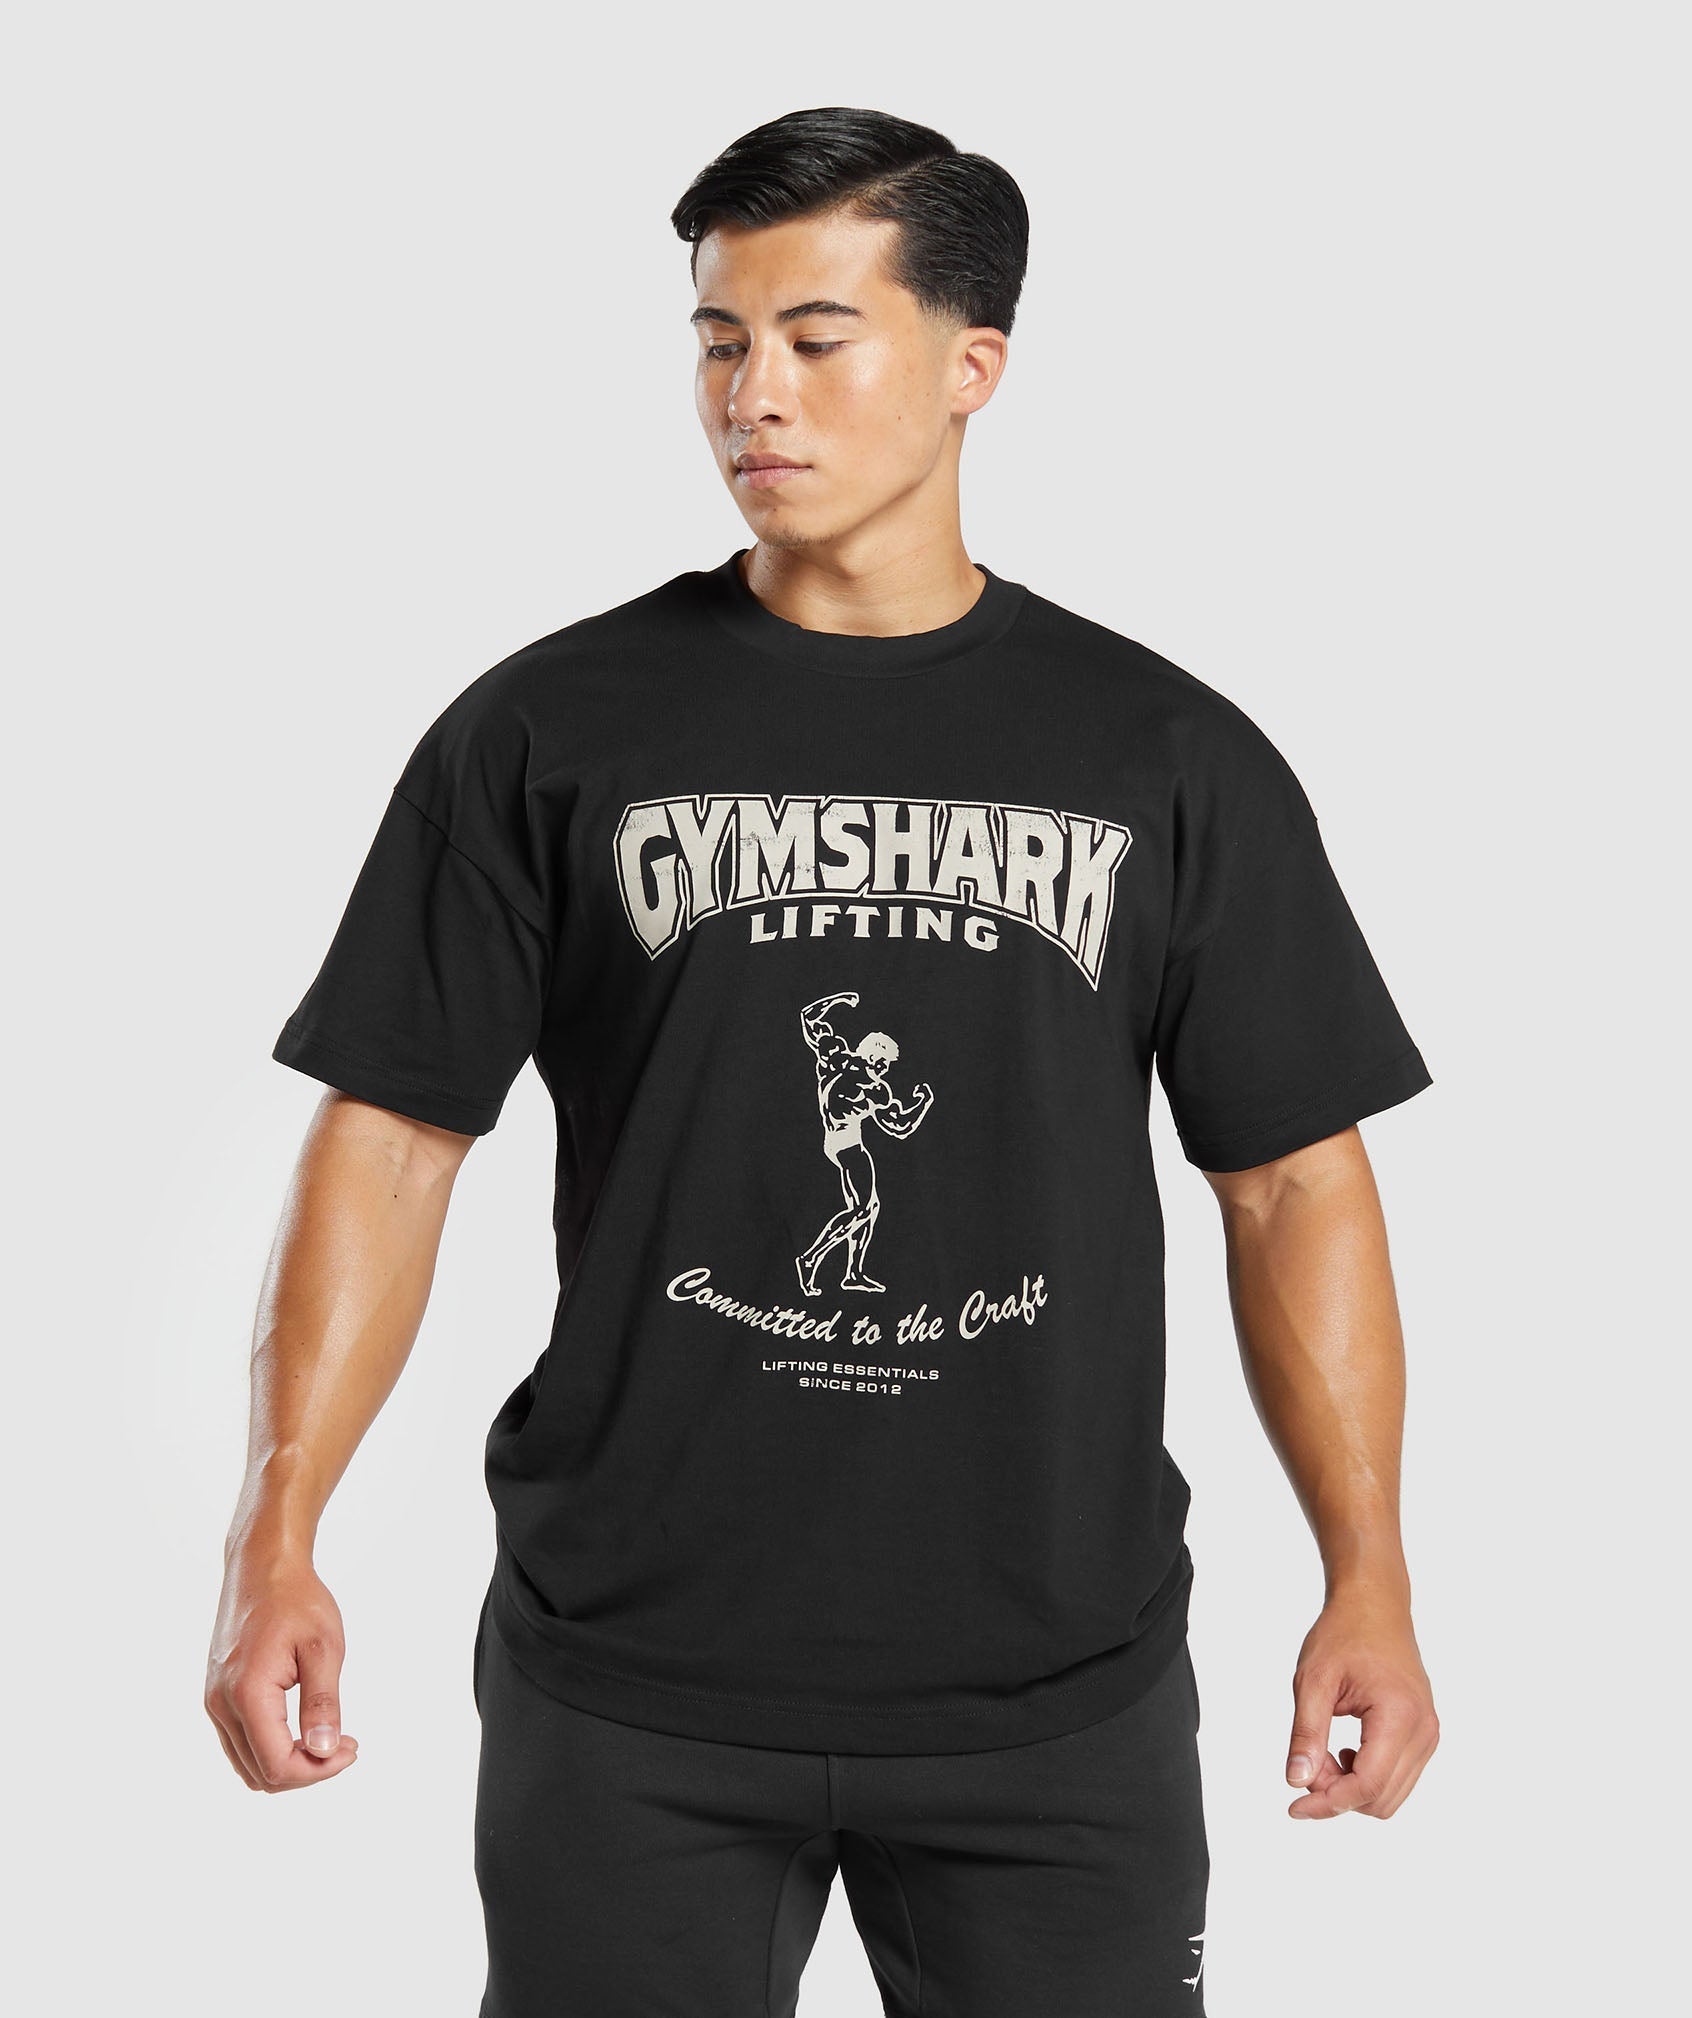 Gymshark Miami Graphic T-Shirt - Black/Dolly Pink